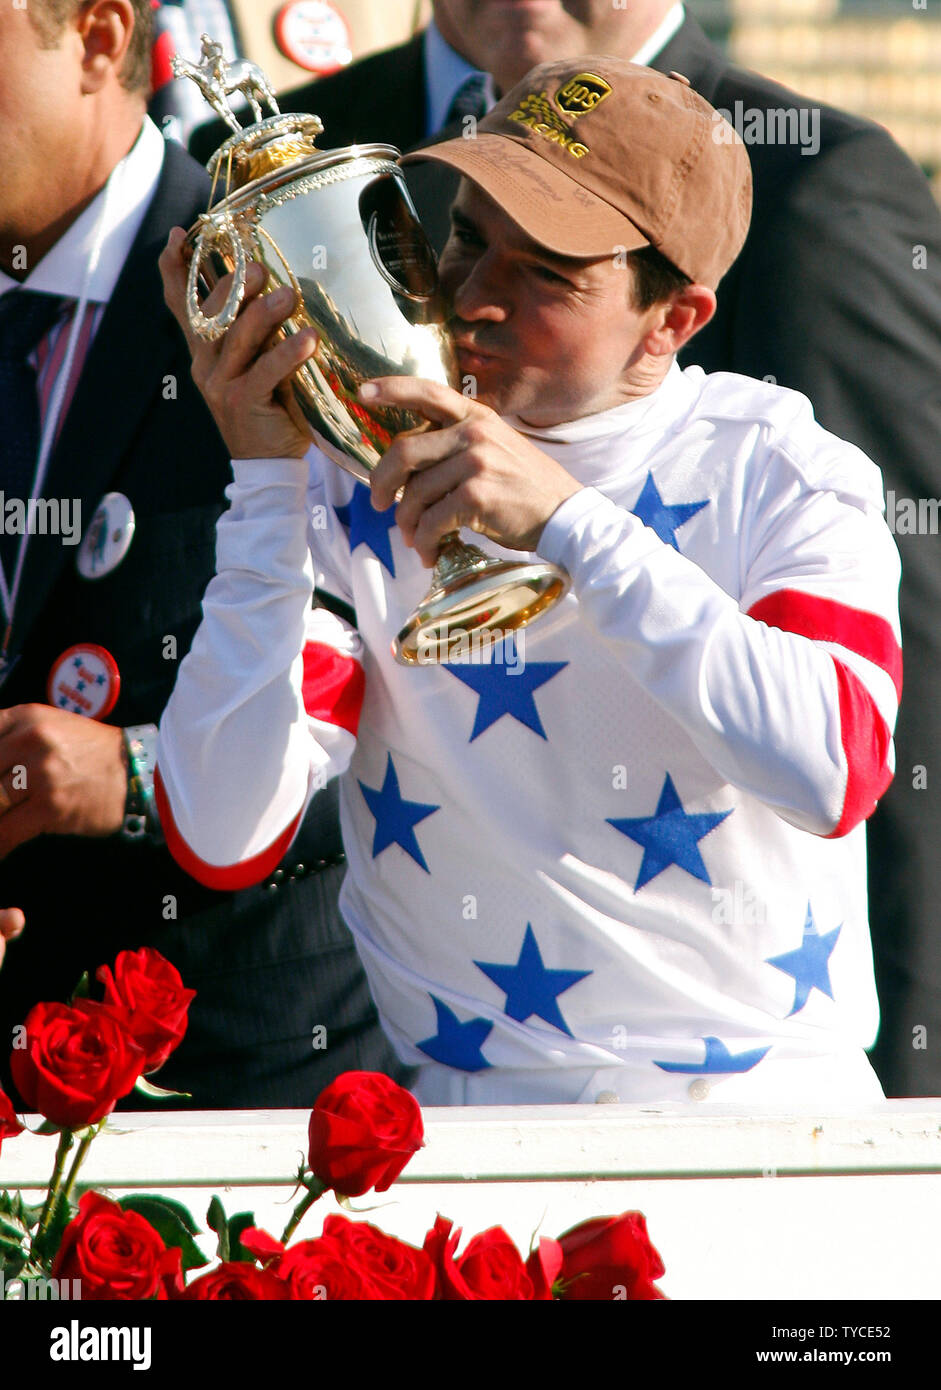 Kent Desormeaux, jockey for winning horse Big Brown, kisses the trophy after winning the 134th running of the Kentucky Derby at Churchill Downs in Louisville, Kentucky on May 3, 2008. (UPI Photo/Frank Polich) Stock Photo